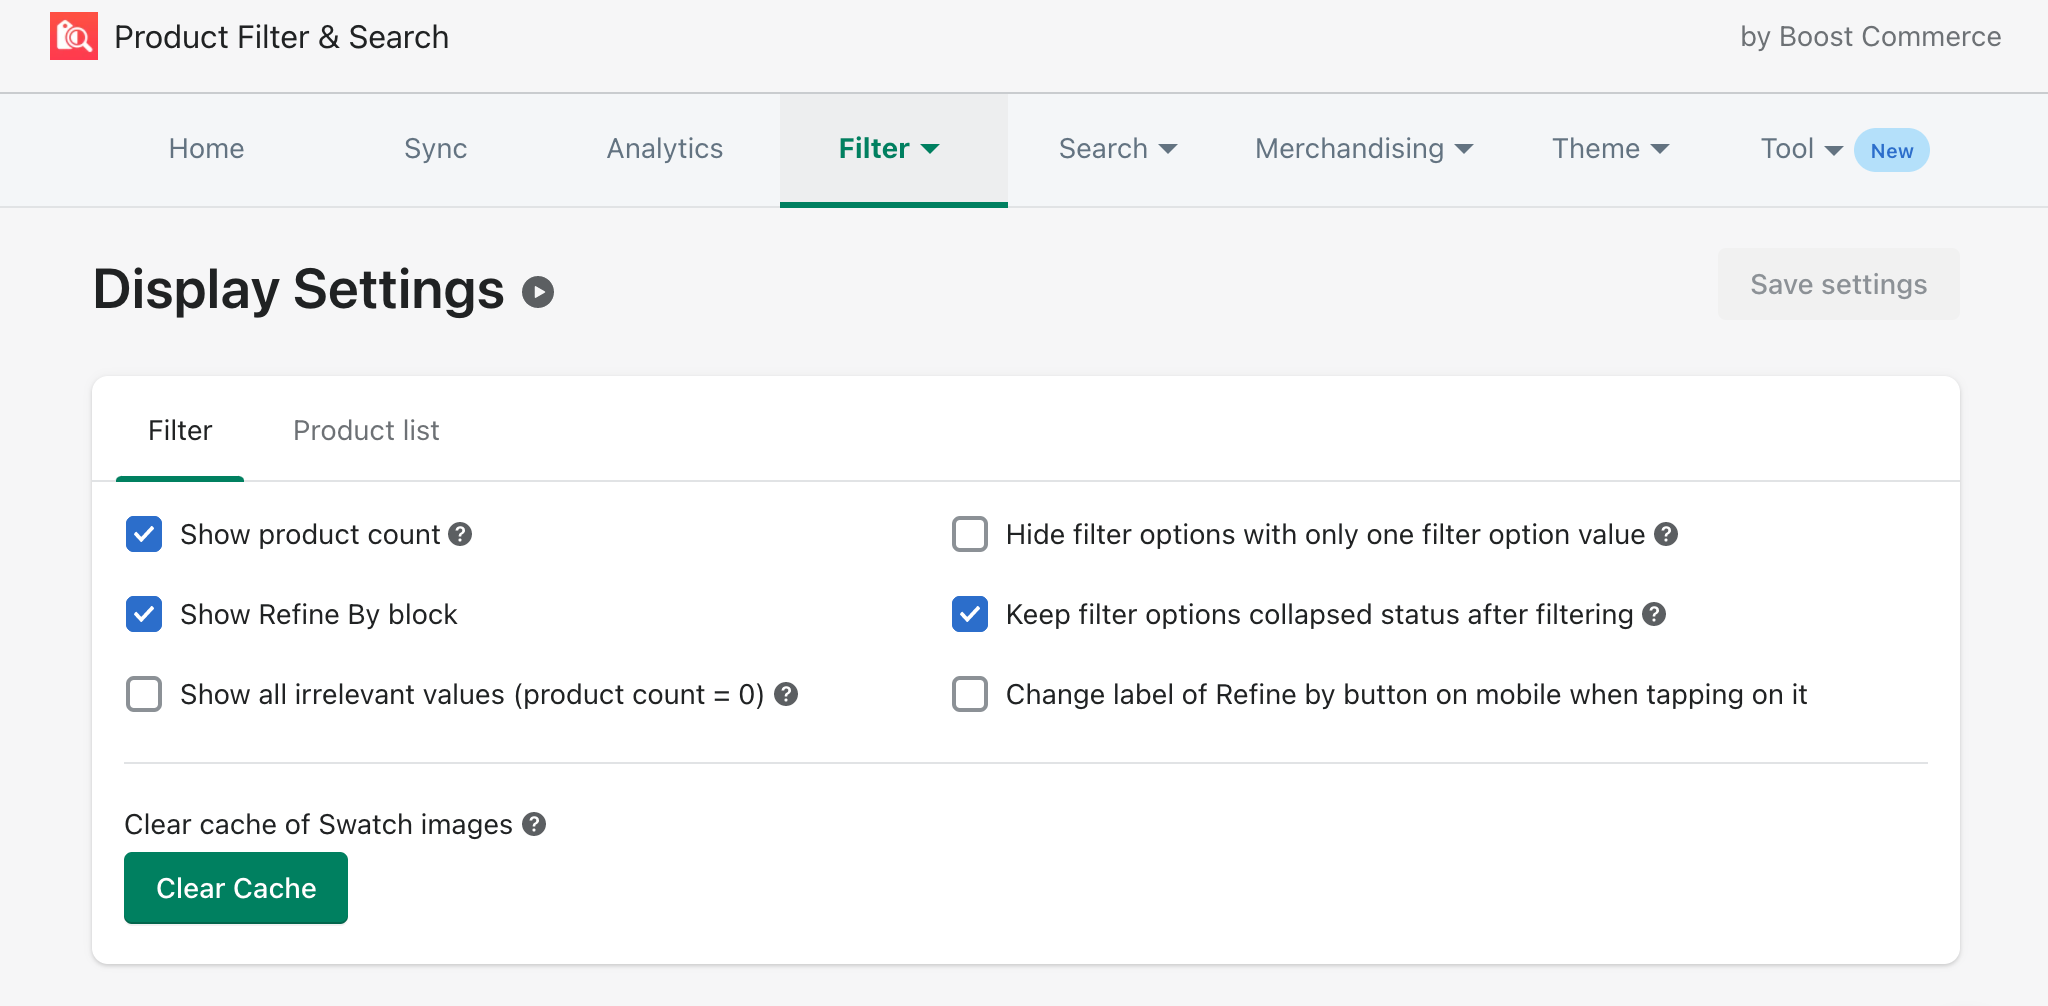 shopify online store 2.0 display settings with boost product filter & search